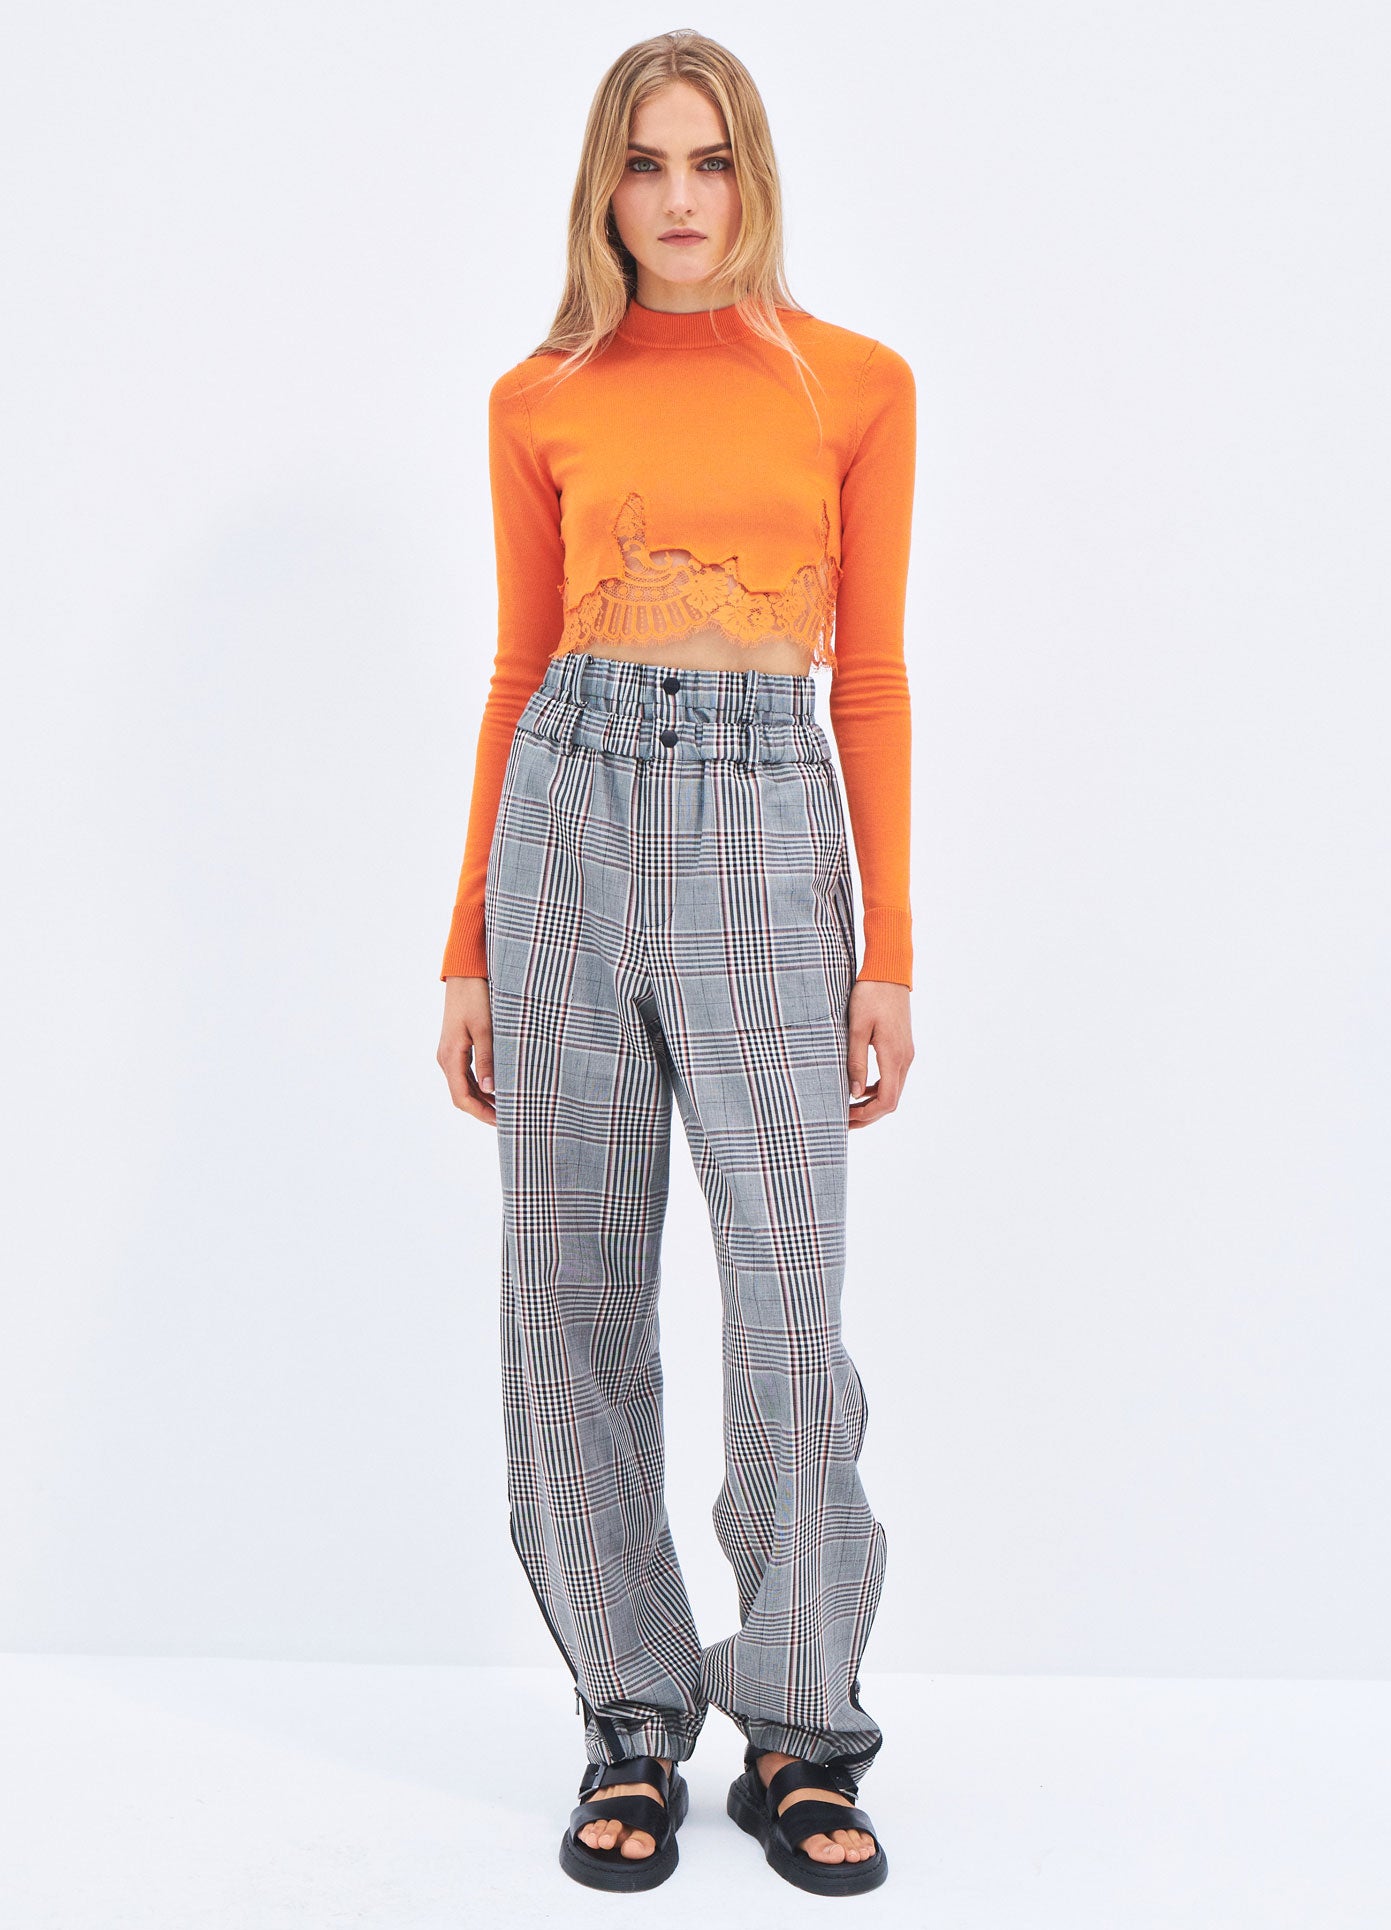 MONSE Spring 2024 Plaid Double Waistband Zipper DTL Pant in Black Multi on model full front view